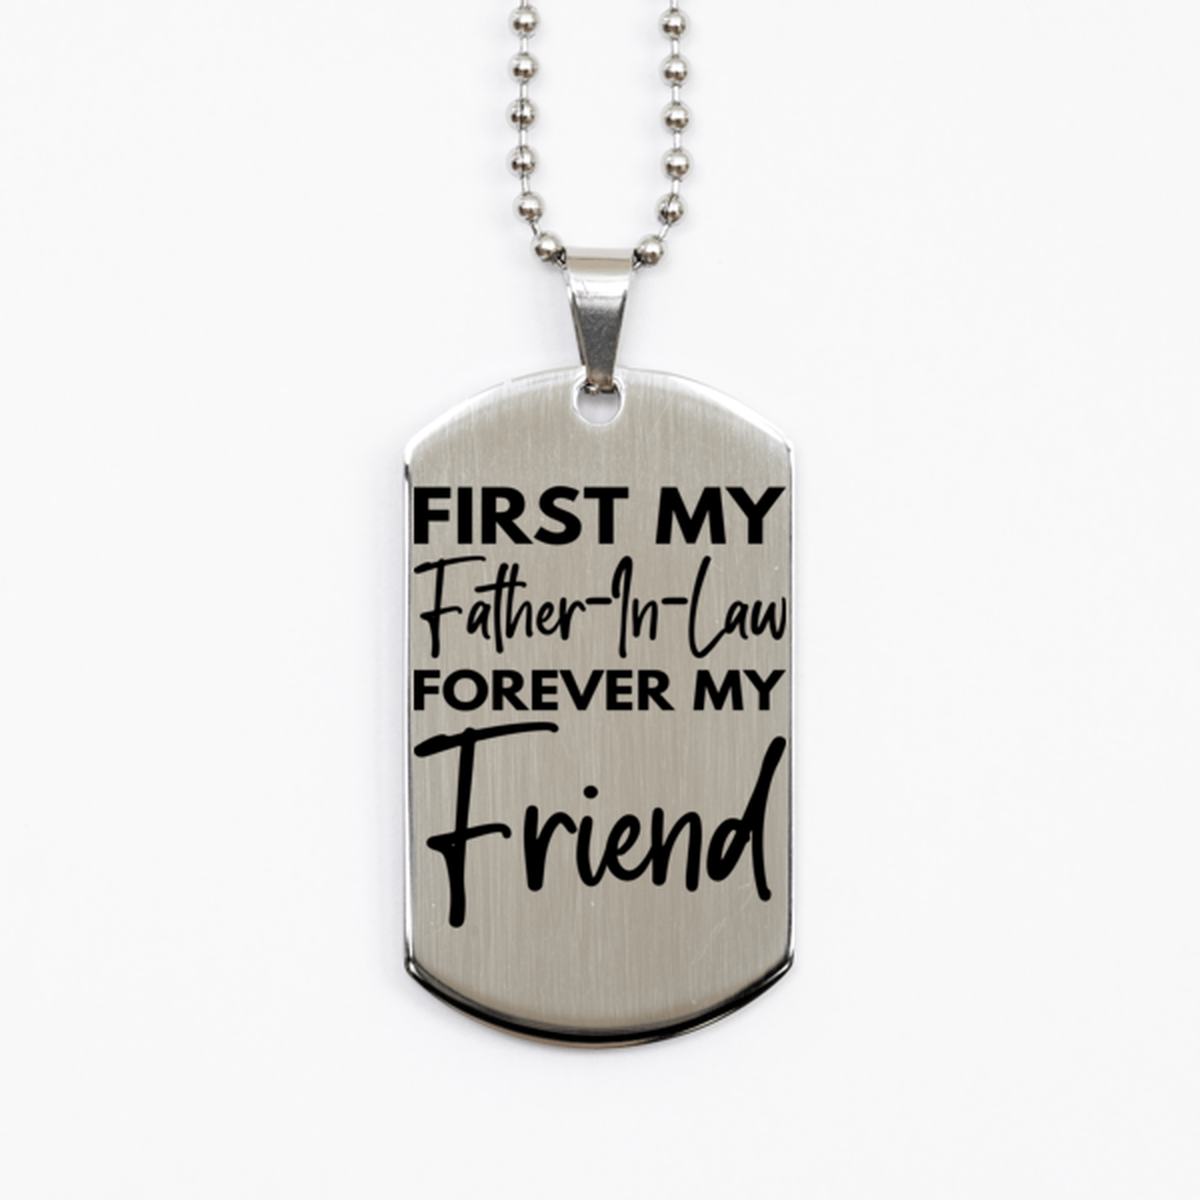 Inspirational Father-In-Law Silver Dog Tag Necklace, First My Father-In-Law Forever My Friend, Best Birthday Gifts for Father-In-Law